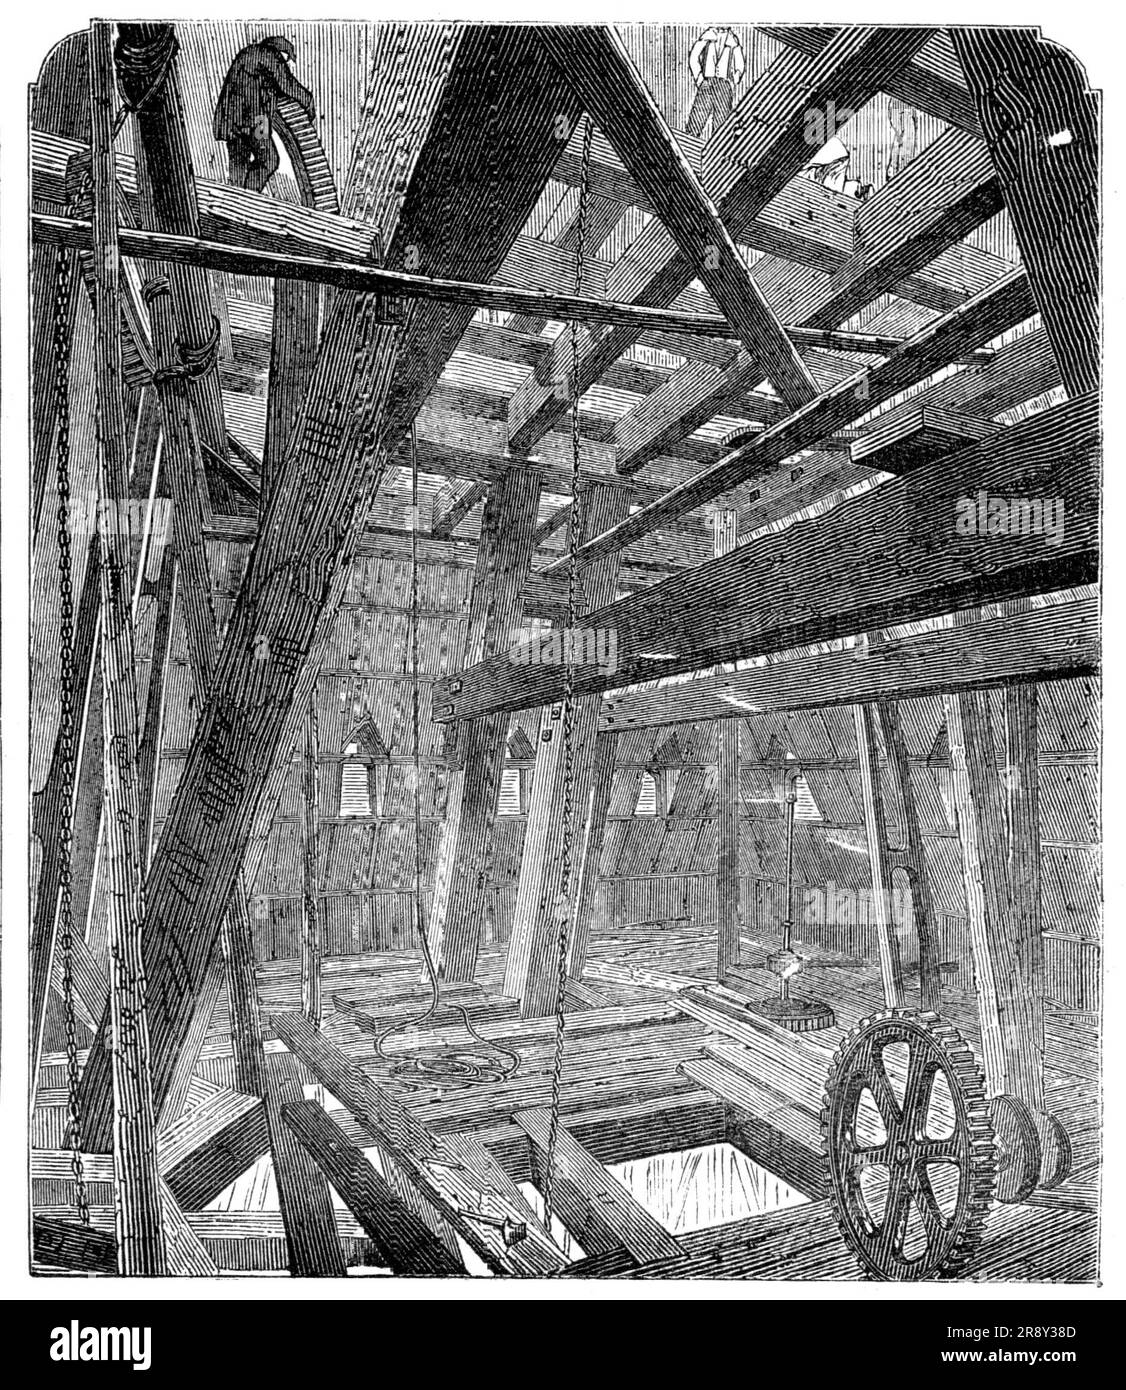 Scaffolding for Raising the Quarter-Bells in the Clock Tower of the New Houses of Parliament, [London], 1857. St Stephen's Tower, (later renamed the Elizabeth Tower), was designed to hold 'Big Ben', the Great Bell of the Great Clock of Westminster. View showing '...the pile of timbers which is now being put up within the limits of the roof of the Clock Tower, for the purpose of raising the bells. It rises nearly twenty feet above the bell chamber, resting mostly upon the iron framework which will eventually carry the bells. It is substantially put together. Upon the upper portion of this rests Stock Photo